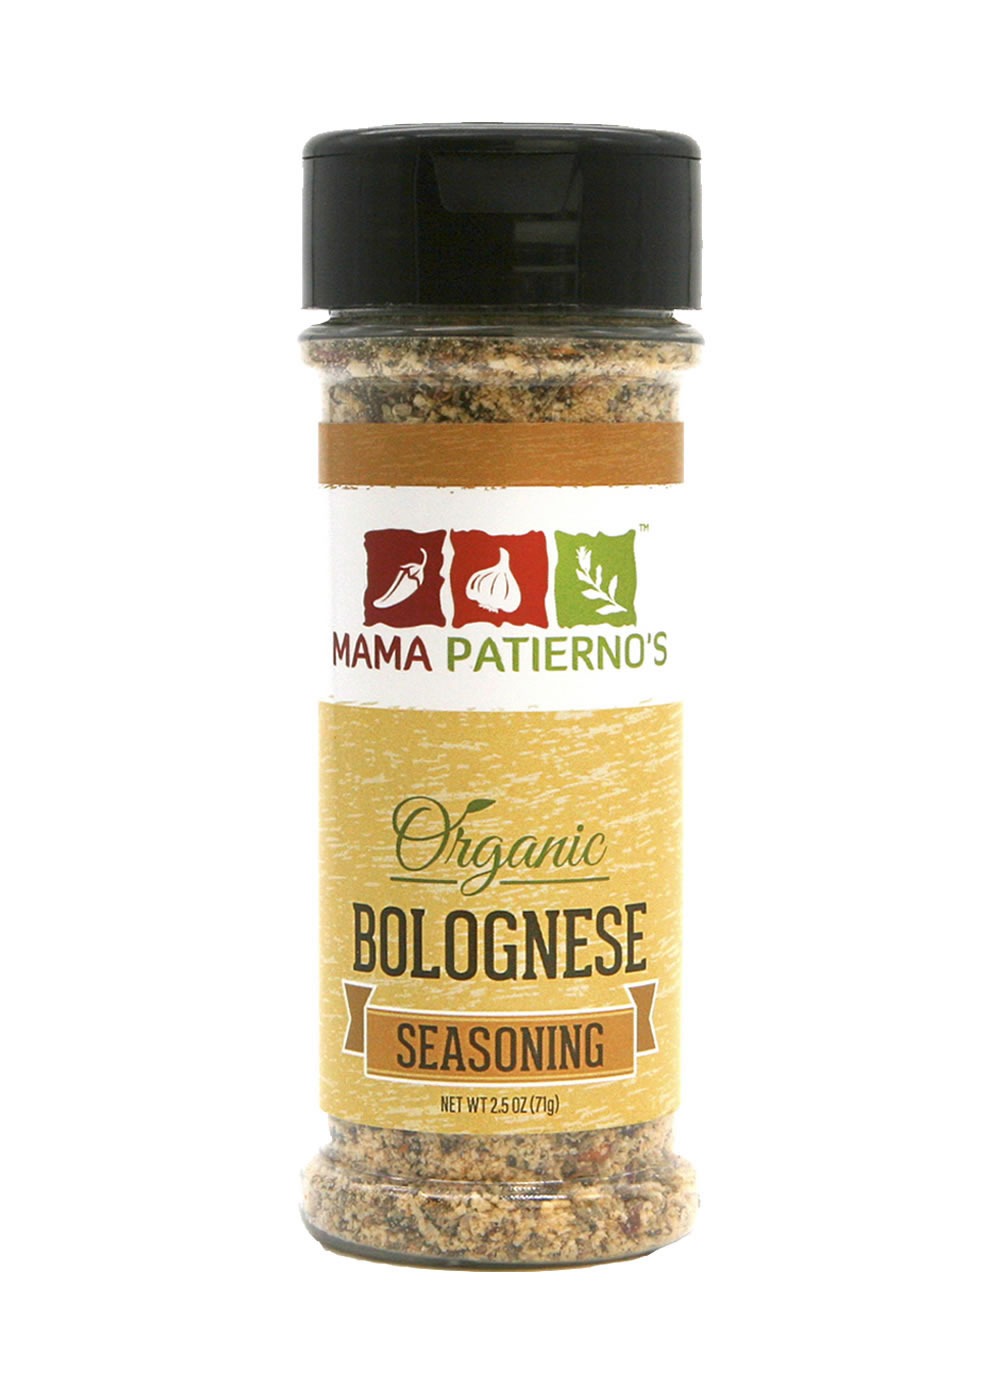 Mama Patierno's Bolognese Sauce Gravy Seasoning - Image front view